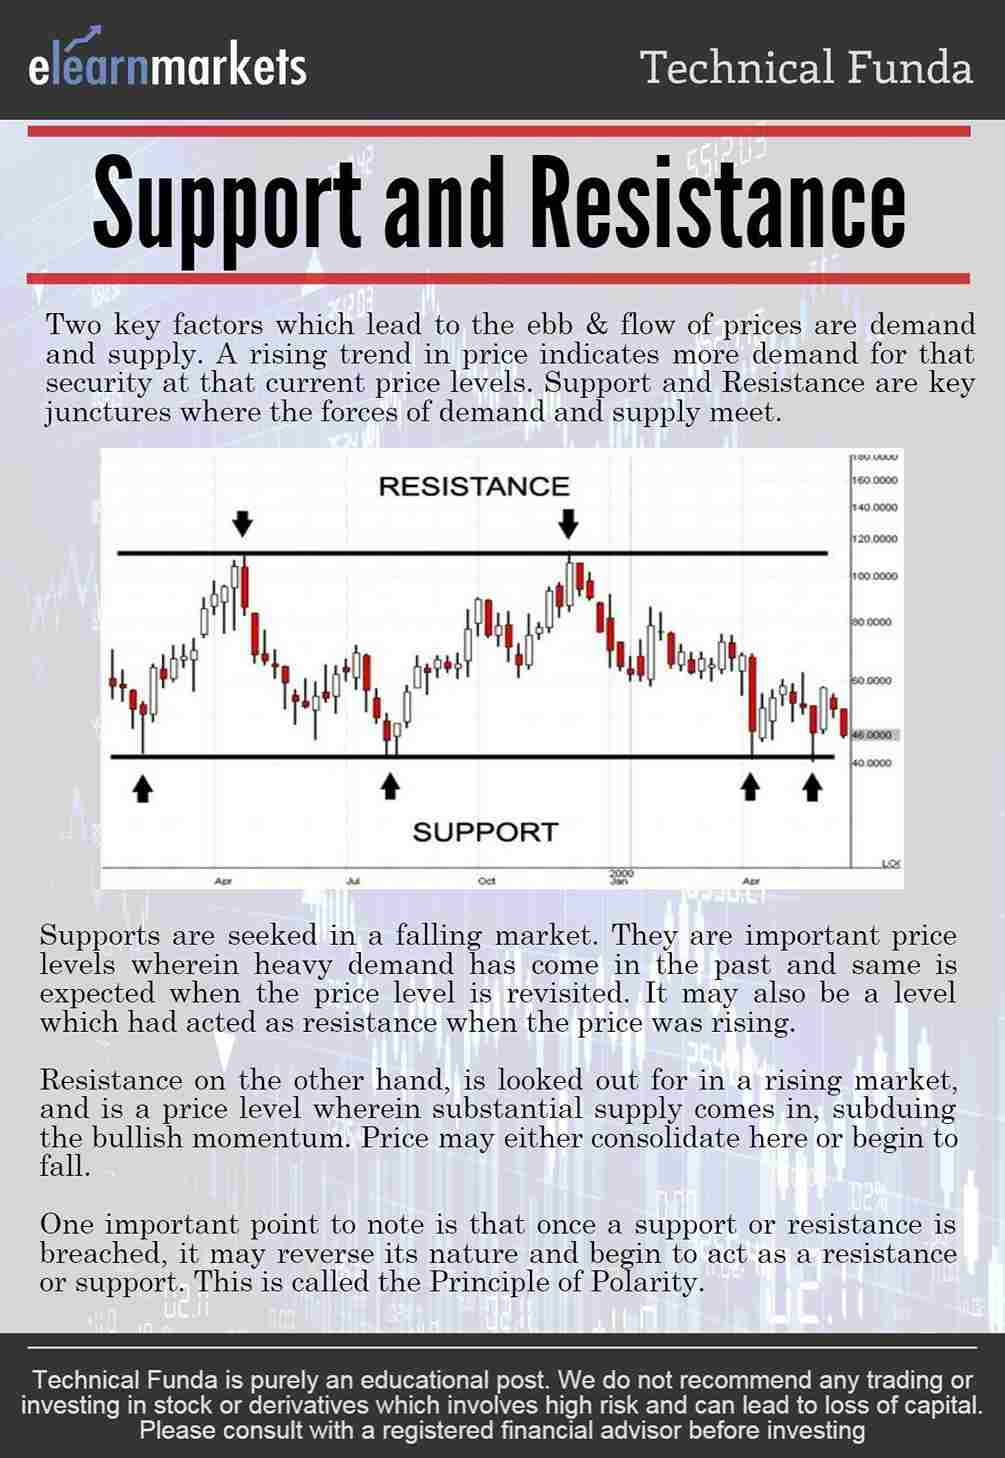 Support and Resistance levels 